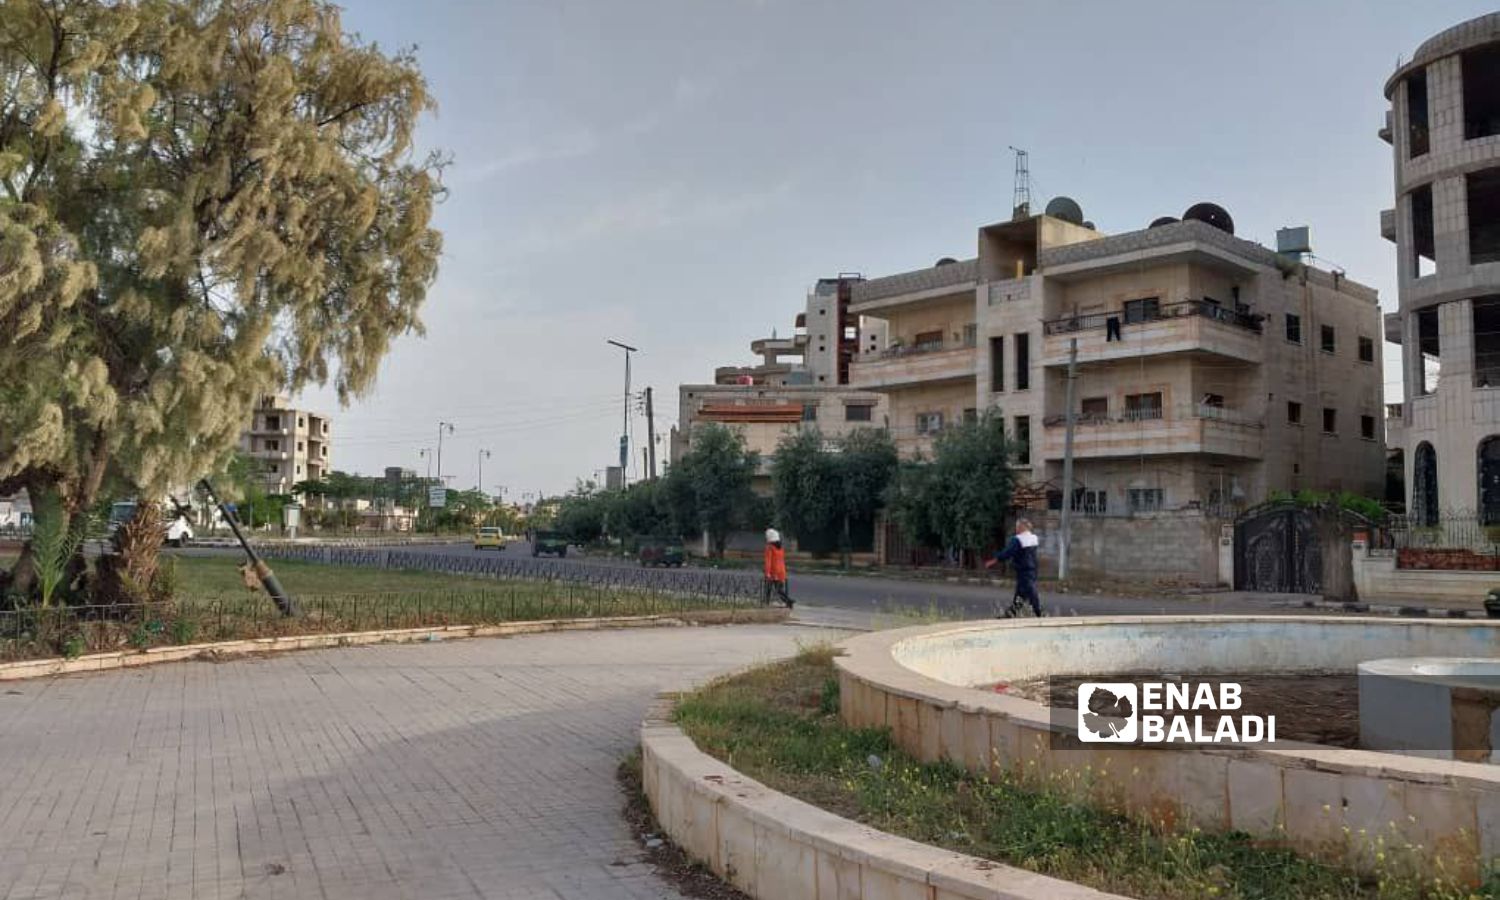 Walking and running activities are active in the neighborhoods of the city of Daraa, southern Syria - April 20, 2024 (Enab Baladi/Sarah al-Ahmad)